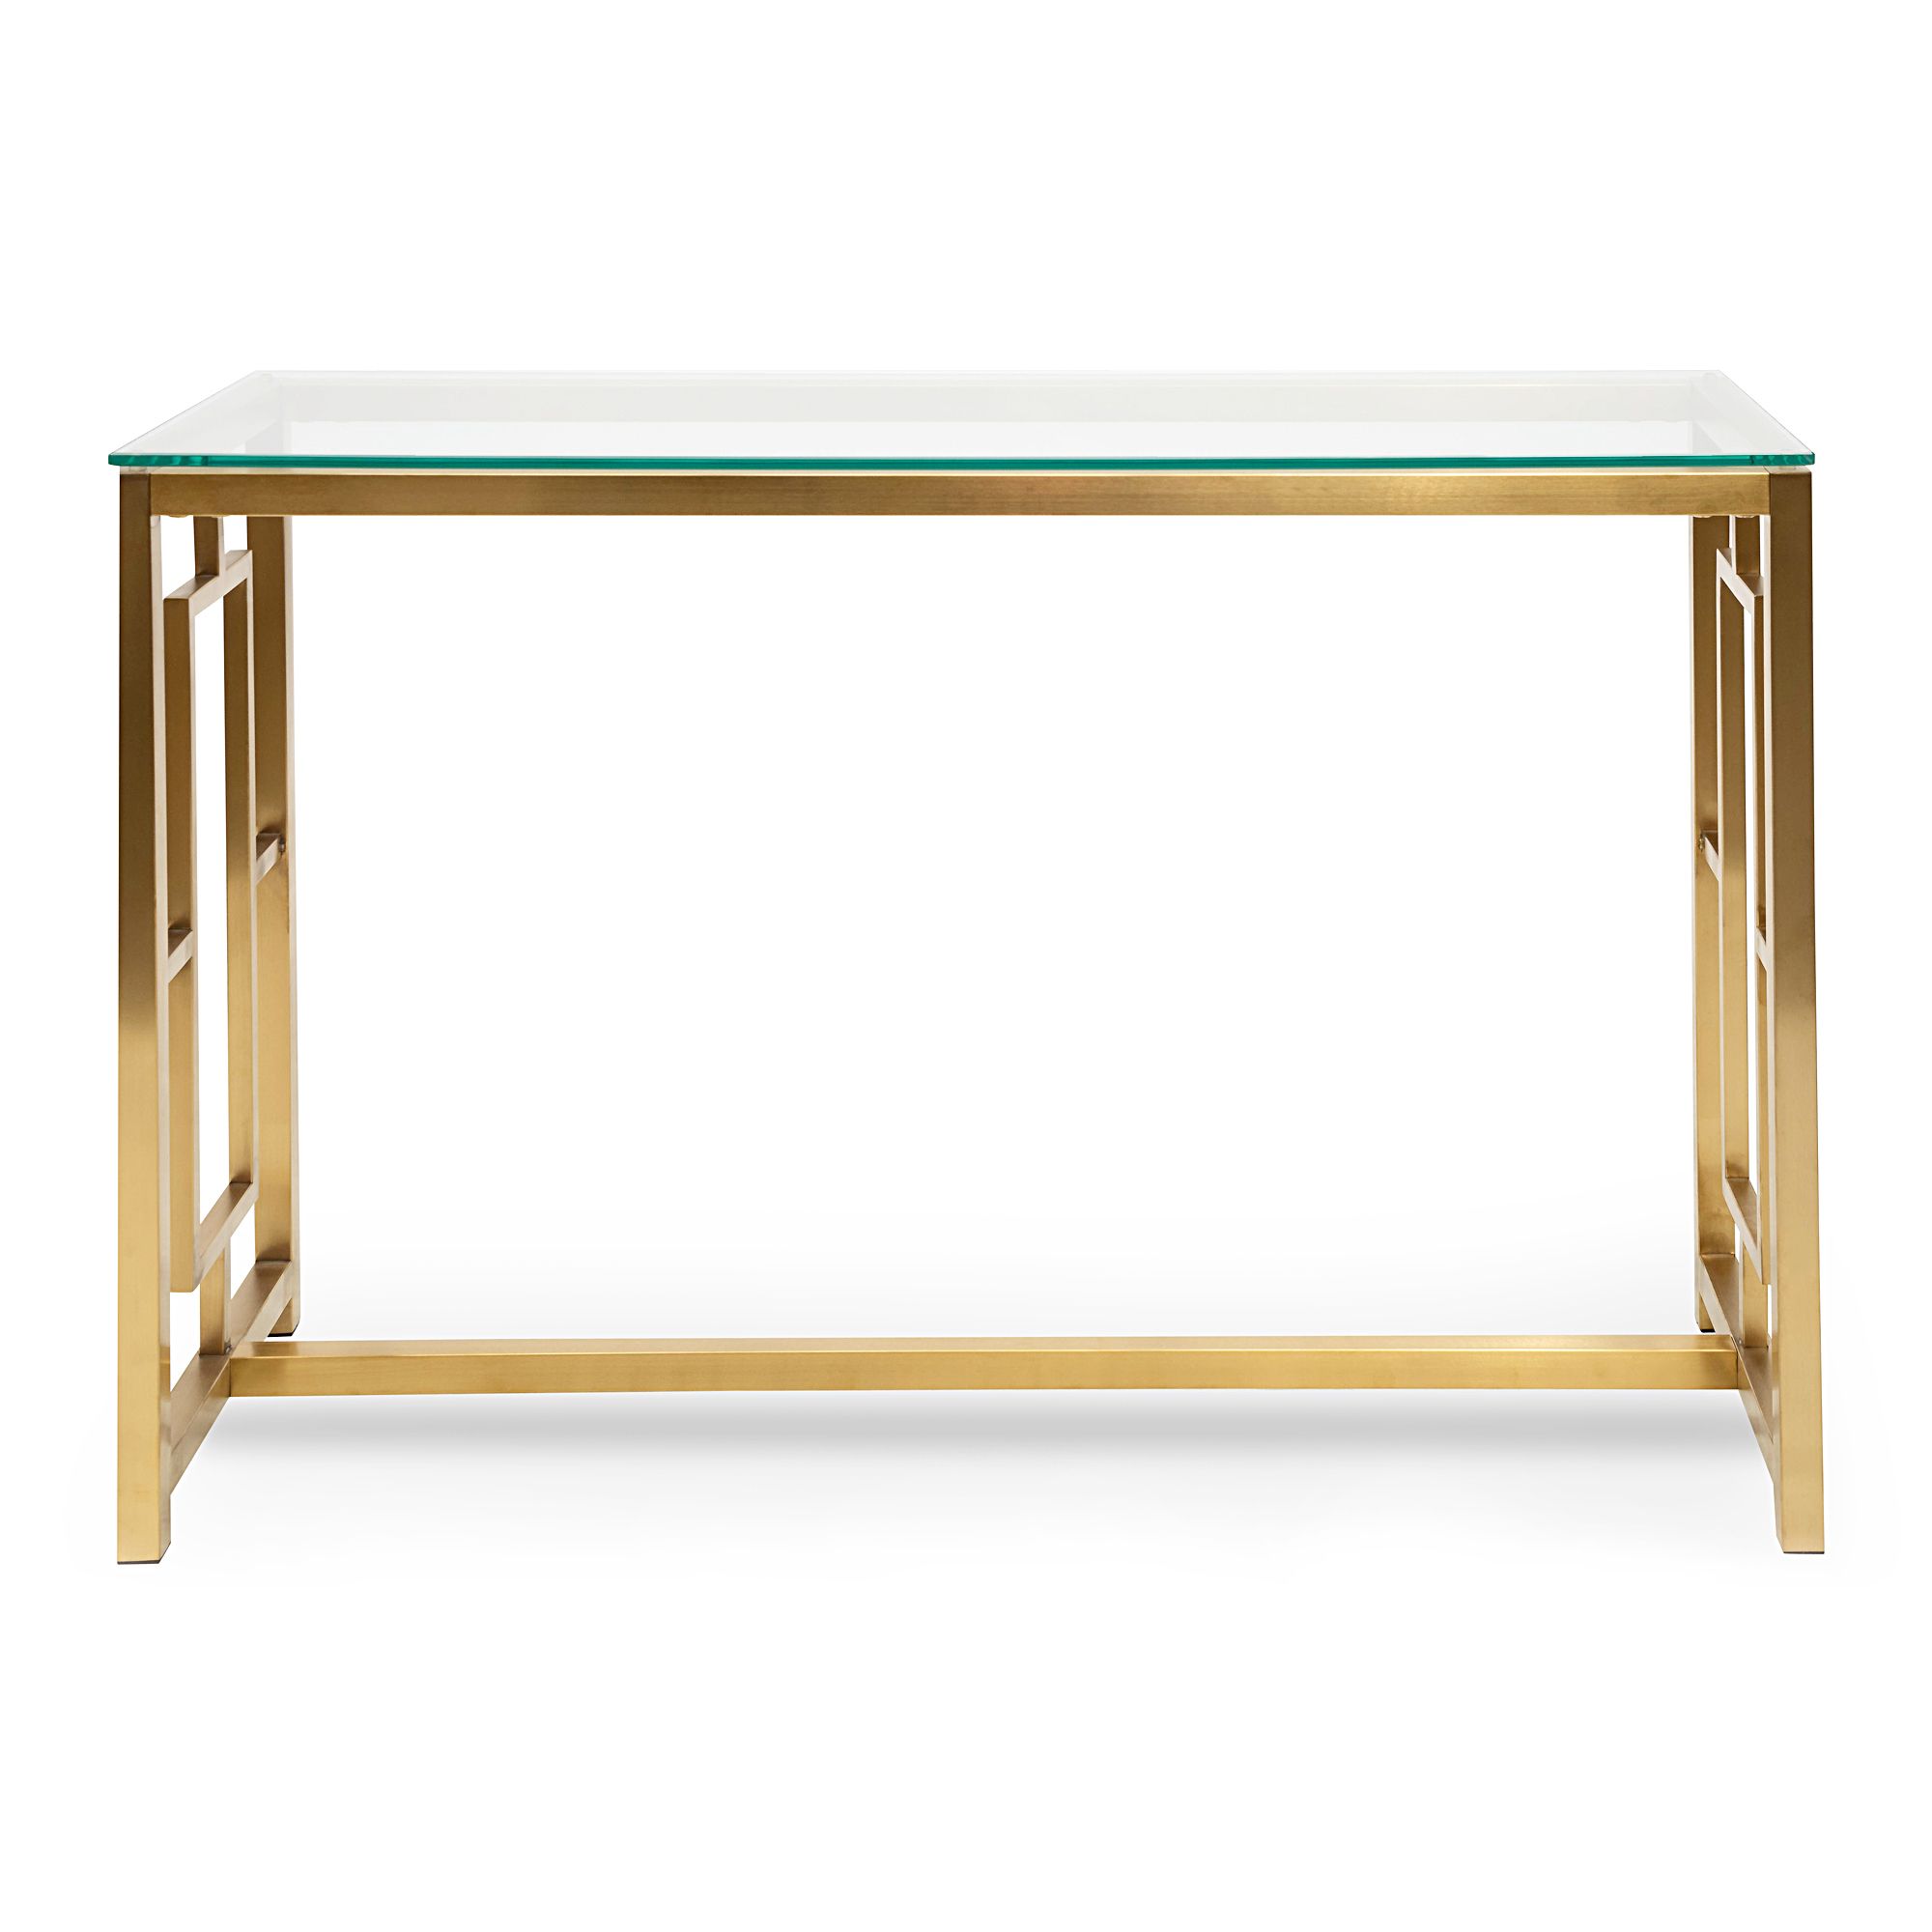 New Brushed Gold Lorenza Glass Top Console Table | Ebay For Glass And Gold Console Tables (View 5 of 20)